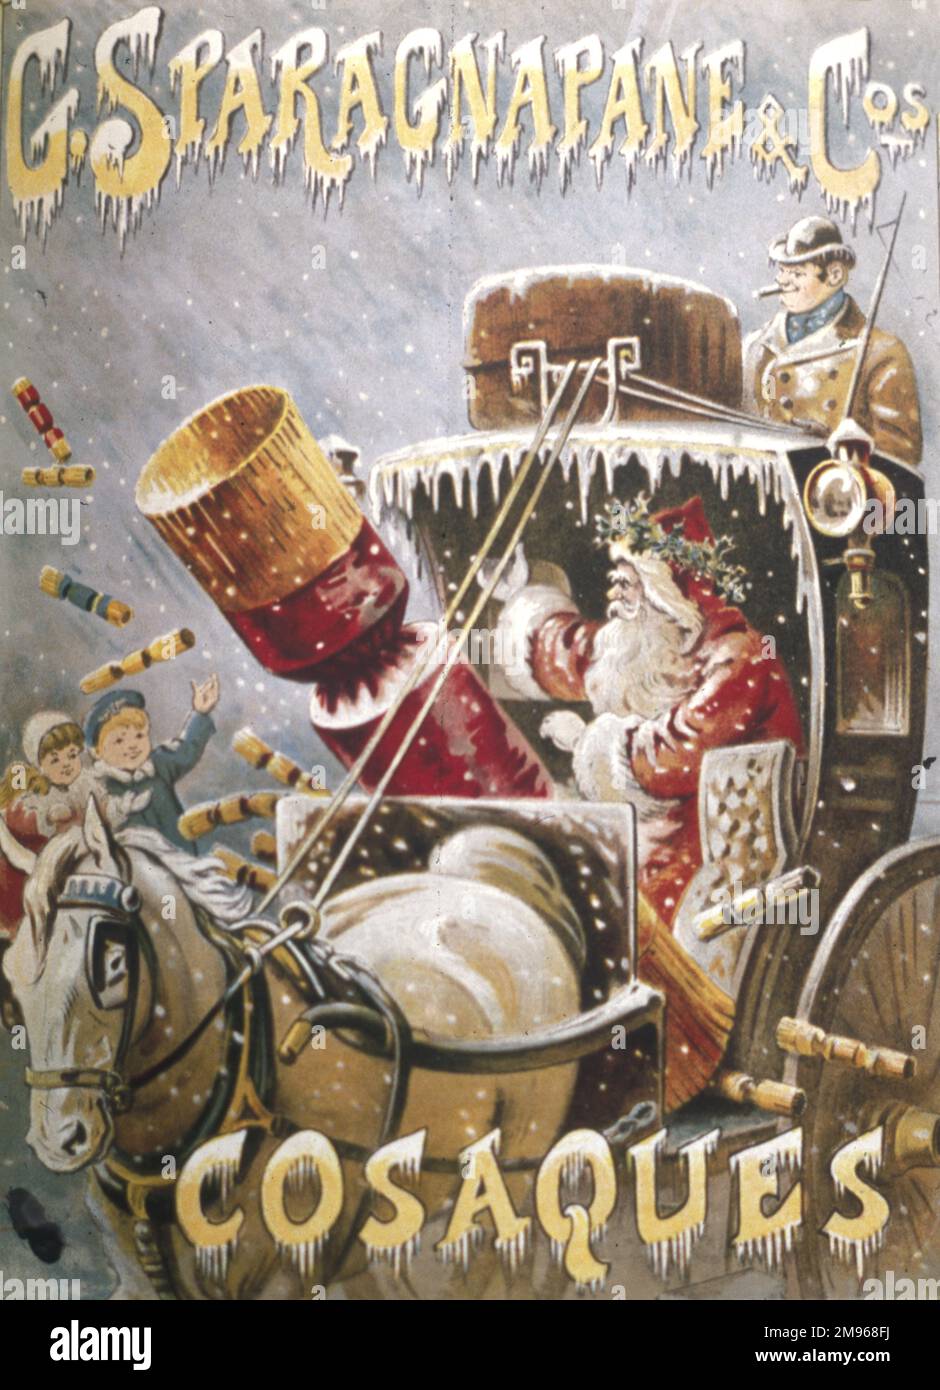 Advertisement for Sparagnapane's Christmas crackers featuring Father Christmas riding through the snow in a horse and carriage with a huge cracker in front of him.  He distributes (much smaller)crackers to children as he passes by. Stock Photo